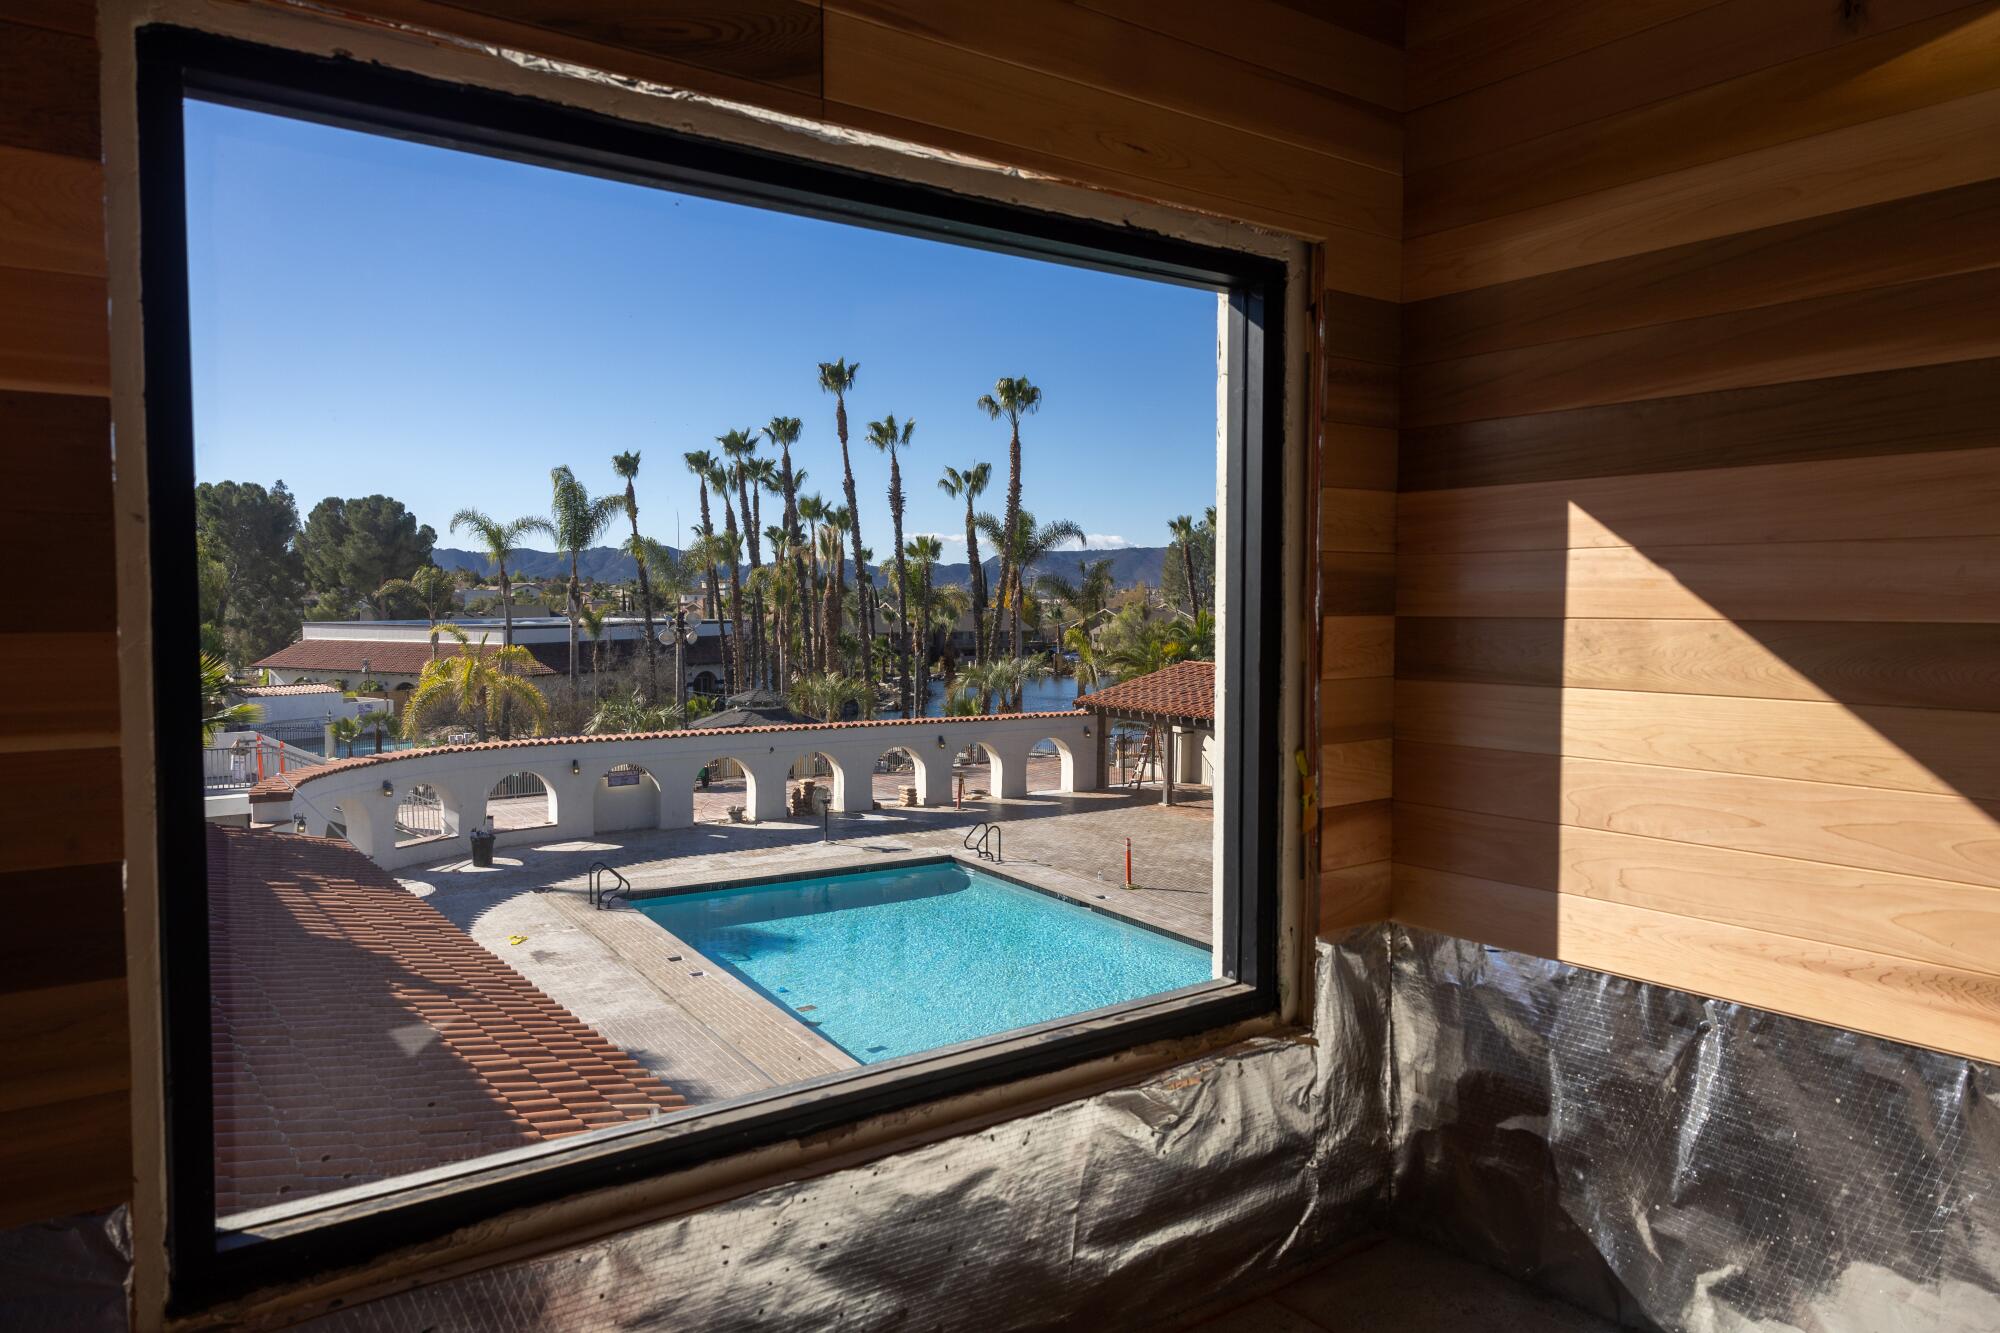 The view from the sauna under construction offers a panoramic view of Murrieta Hot Springs Resort. 